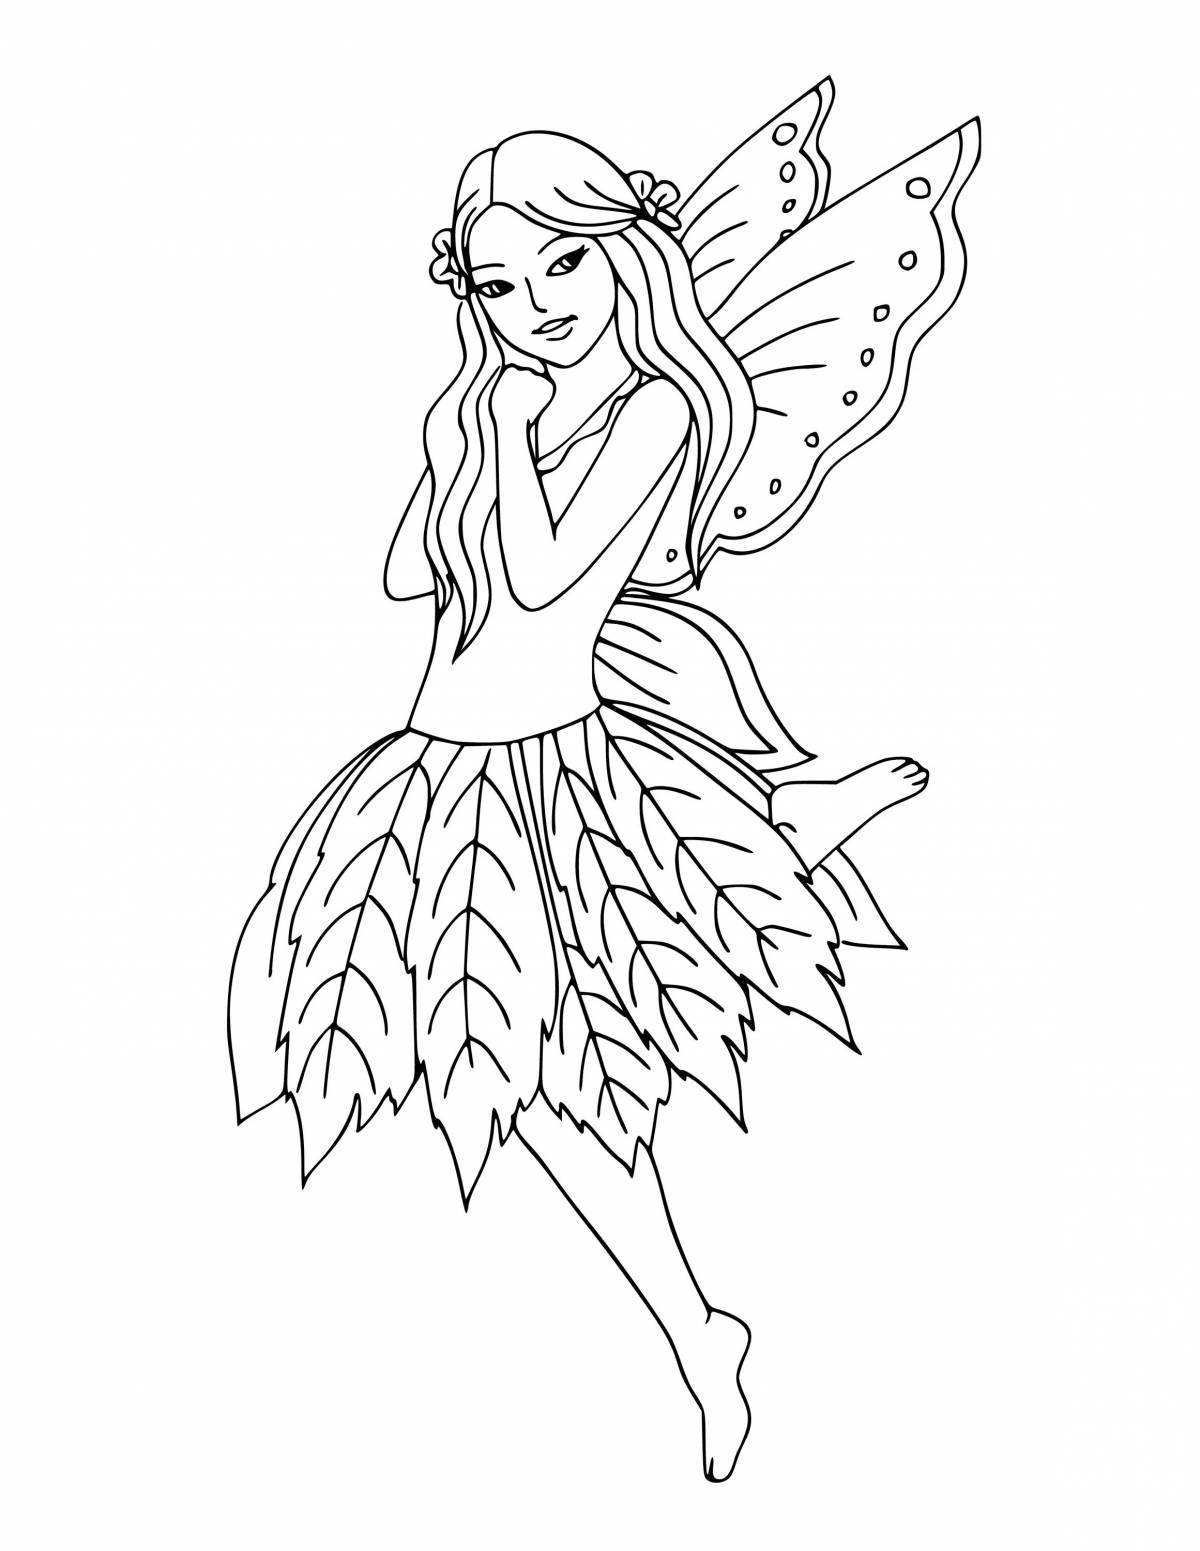 Violent fairy coloring pages for girls